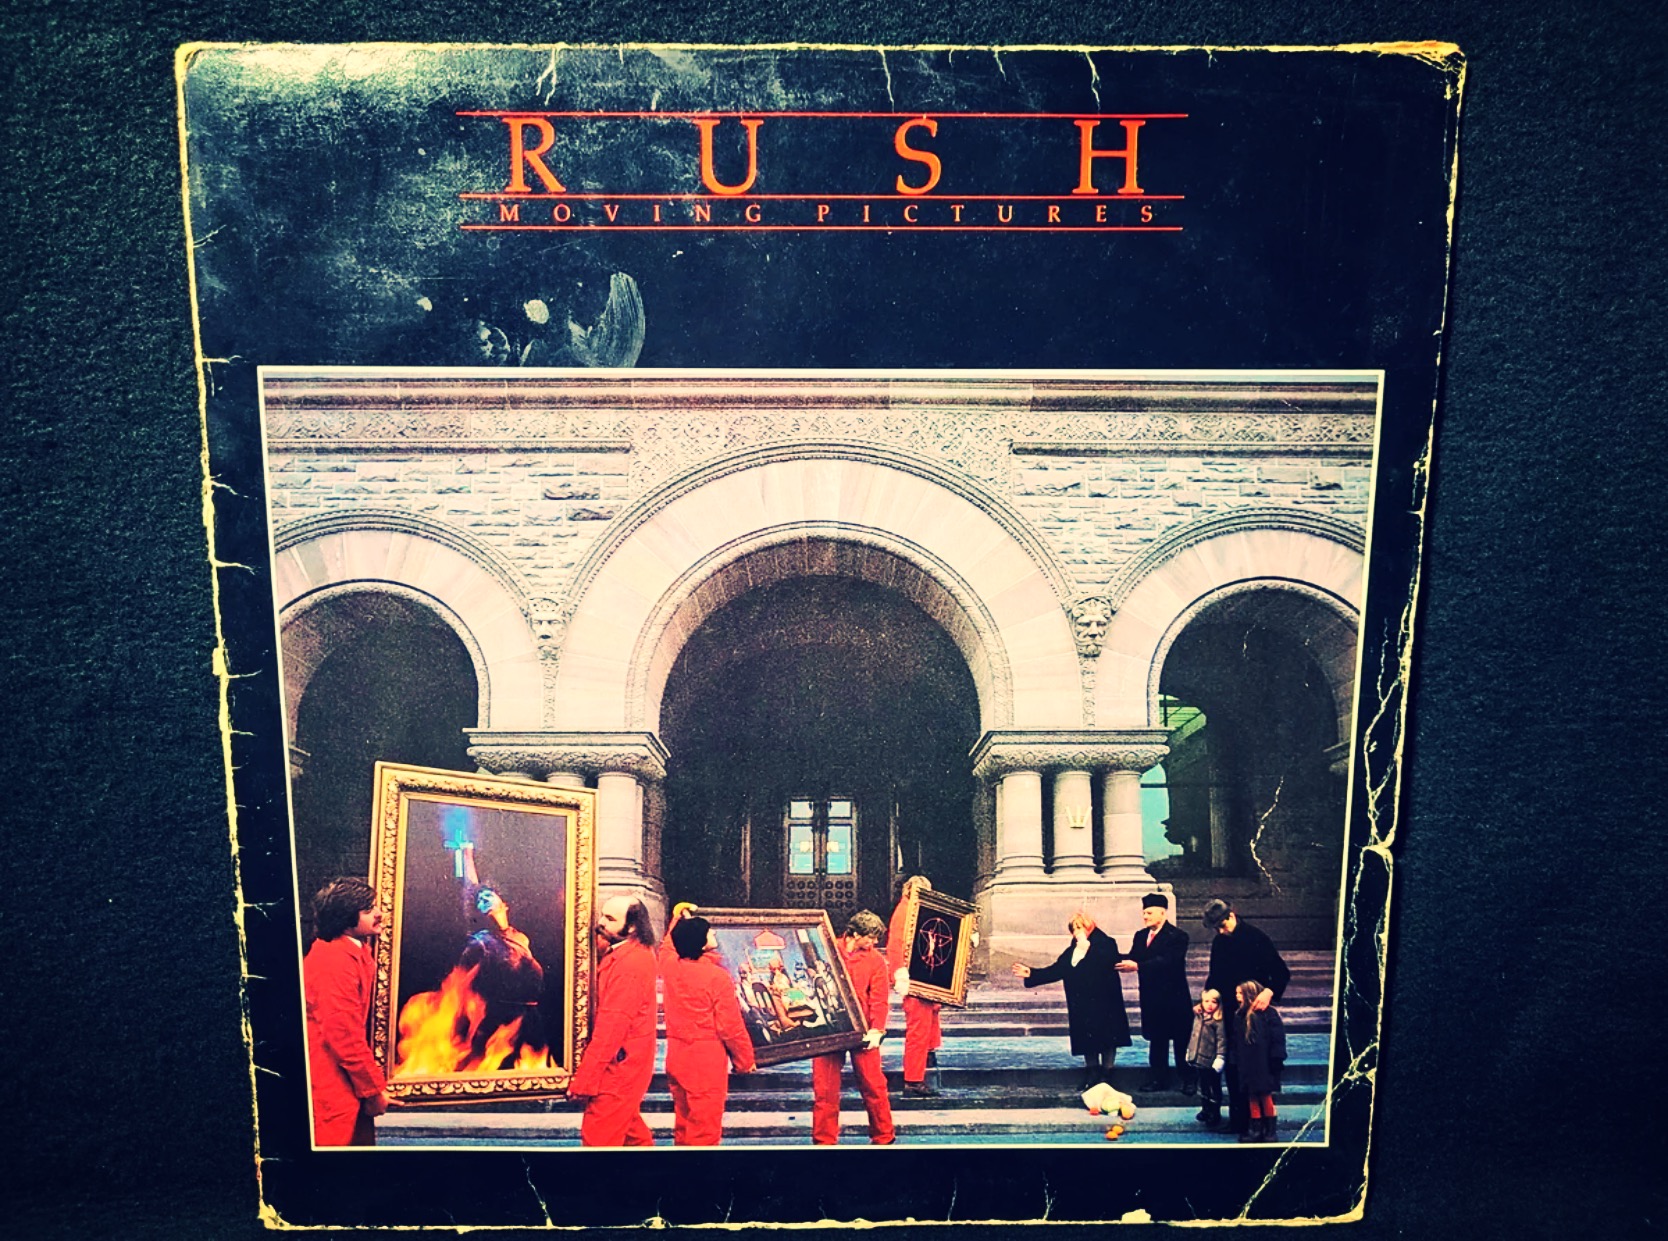 “Moving Pictures” by Rush: A Timeless Masterpiece